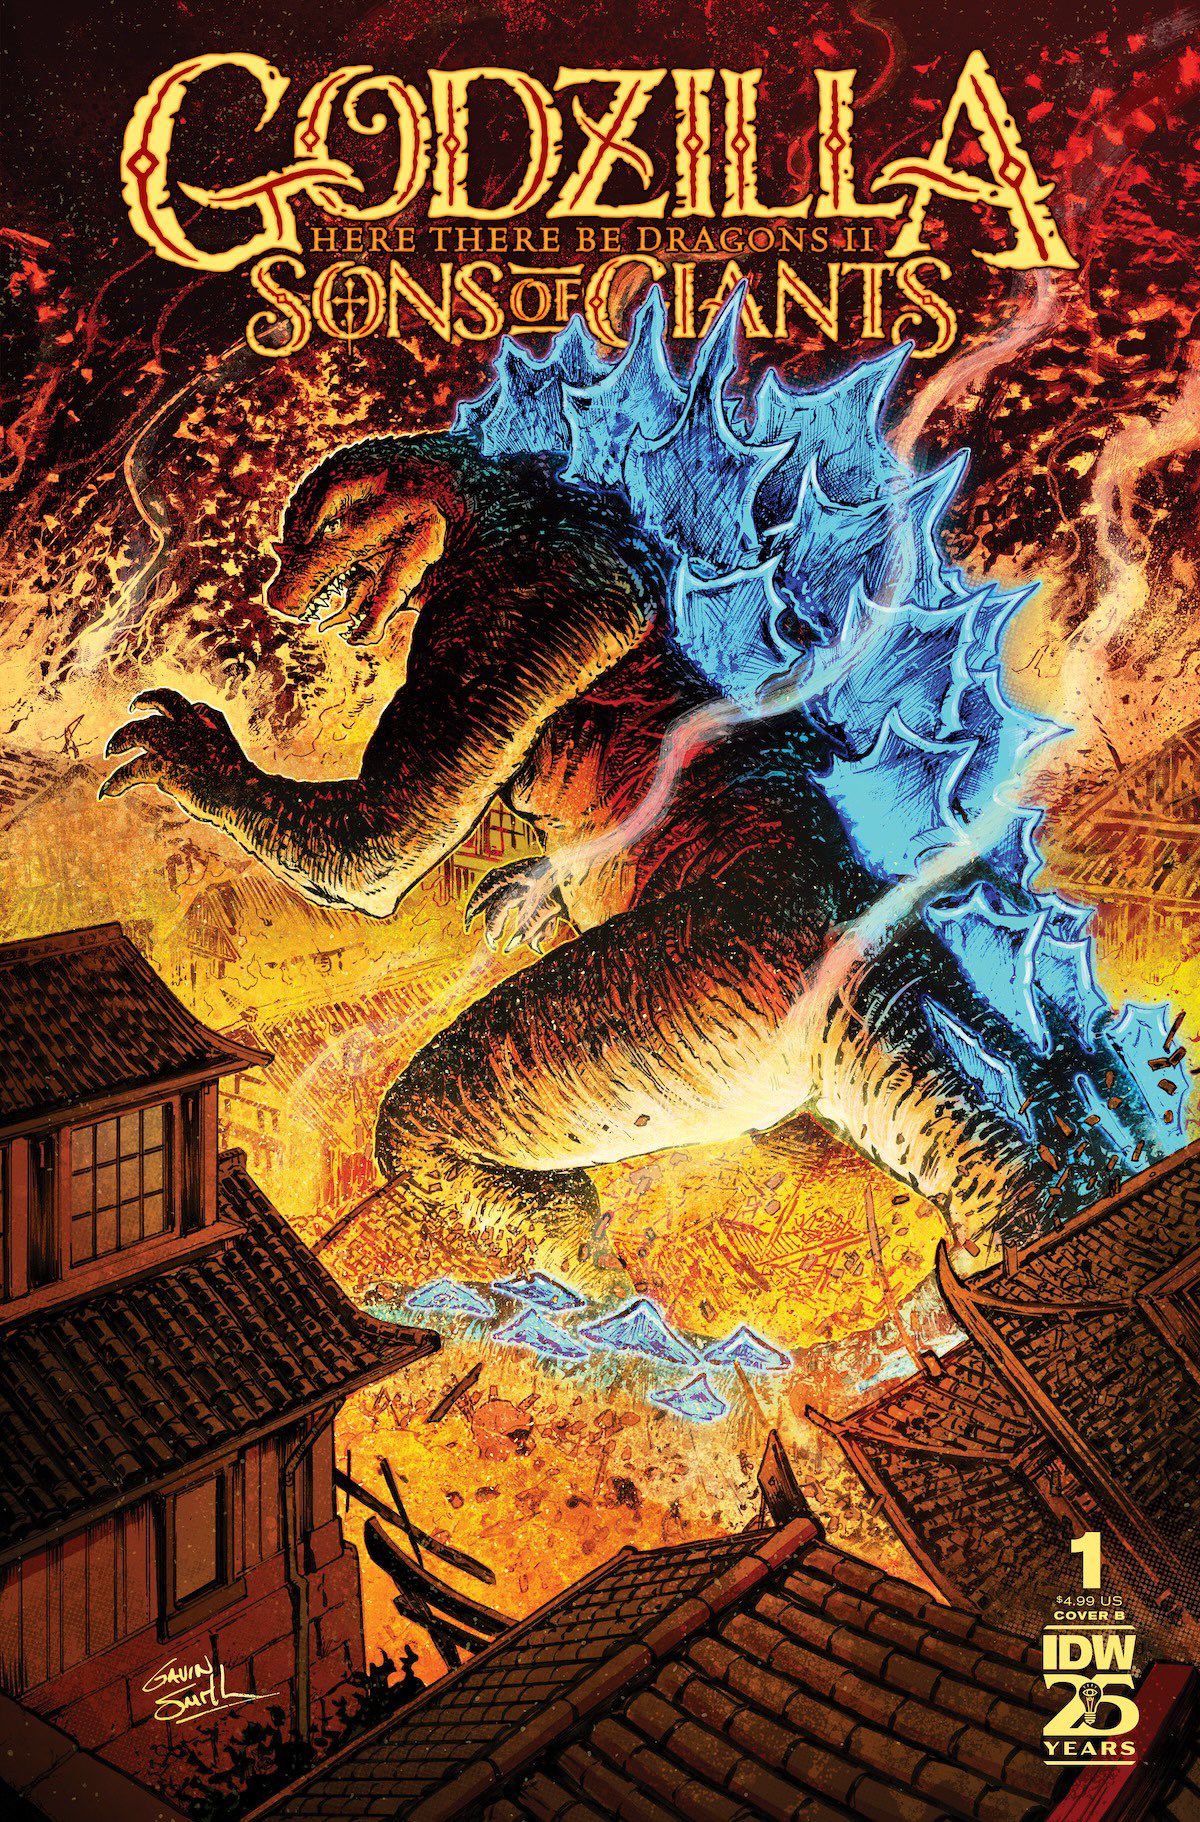 Gavin Smith on X: "Announced by @Godzilla_Toho … I'm one of the cover  artists for Godzilla: Here there Be Dragons II: SONS OF GIANTS. I've got a  busy summer full of releases